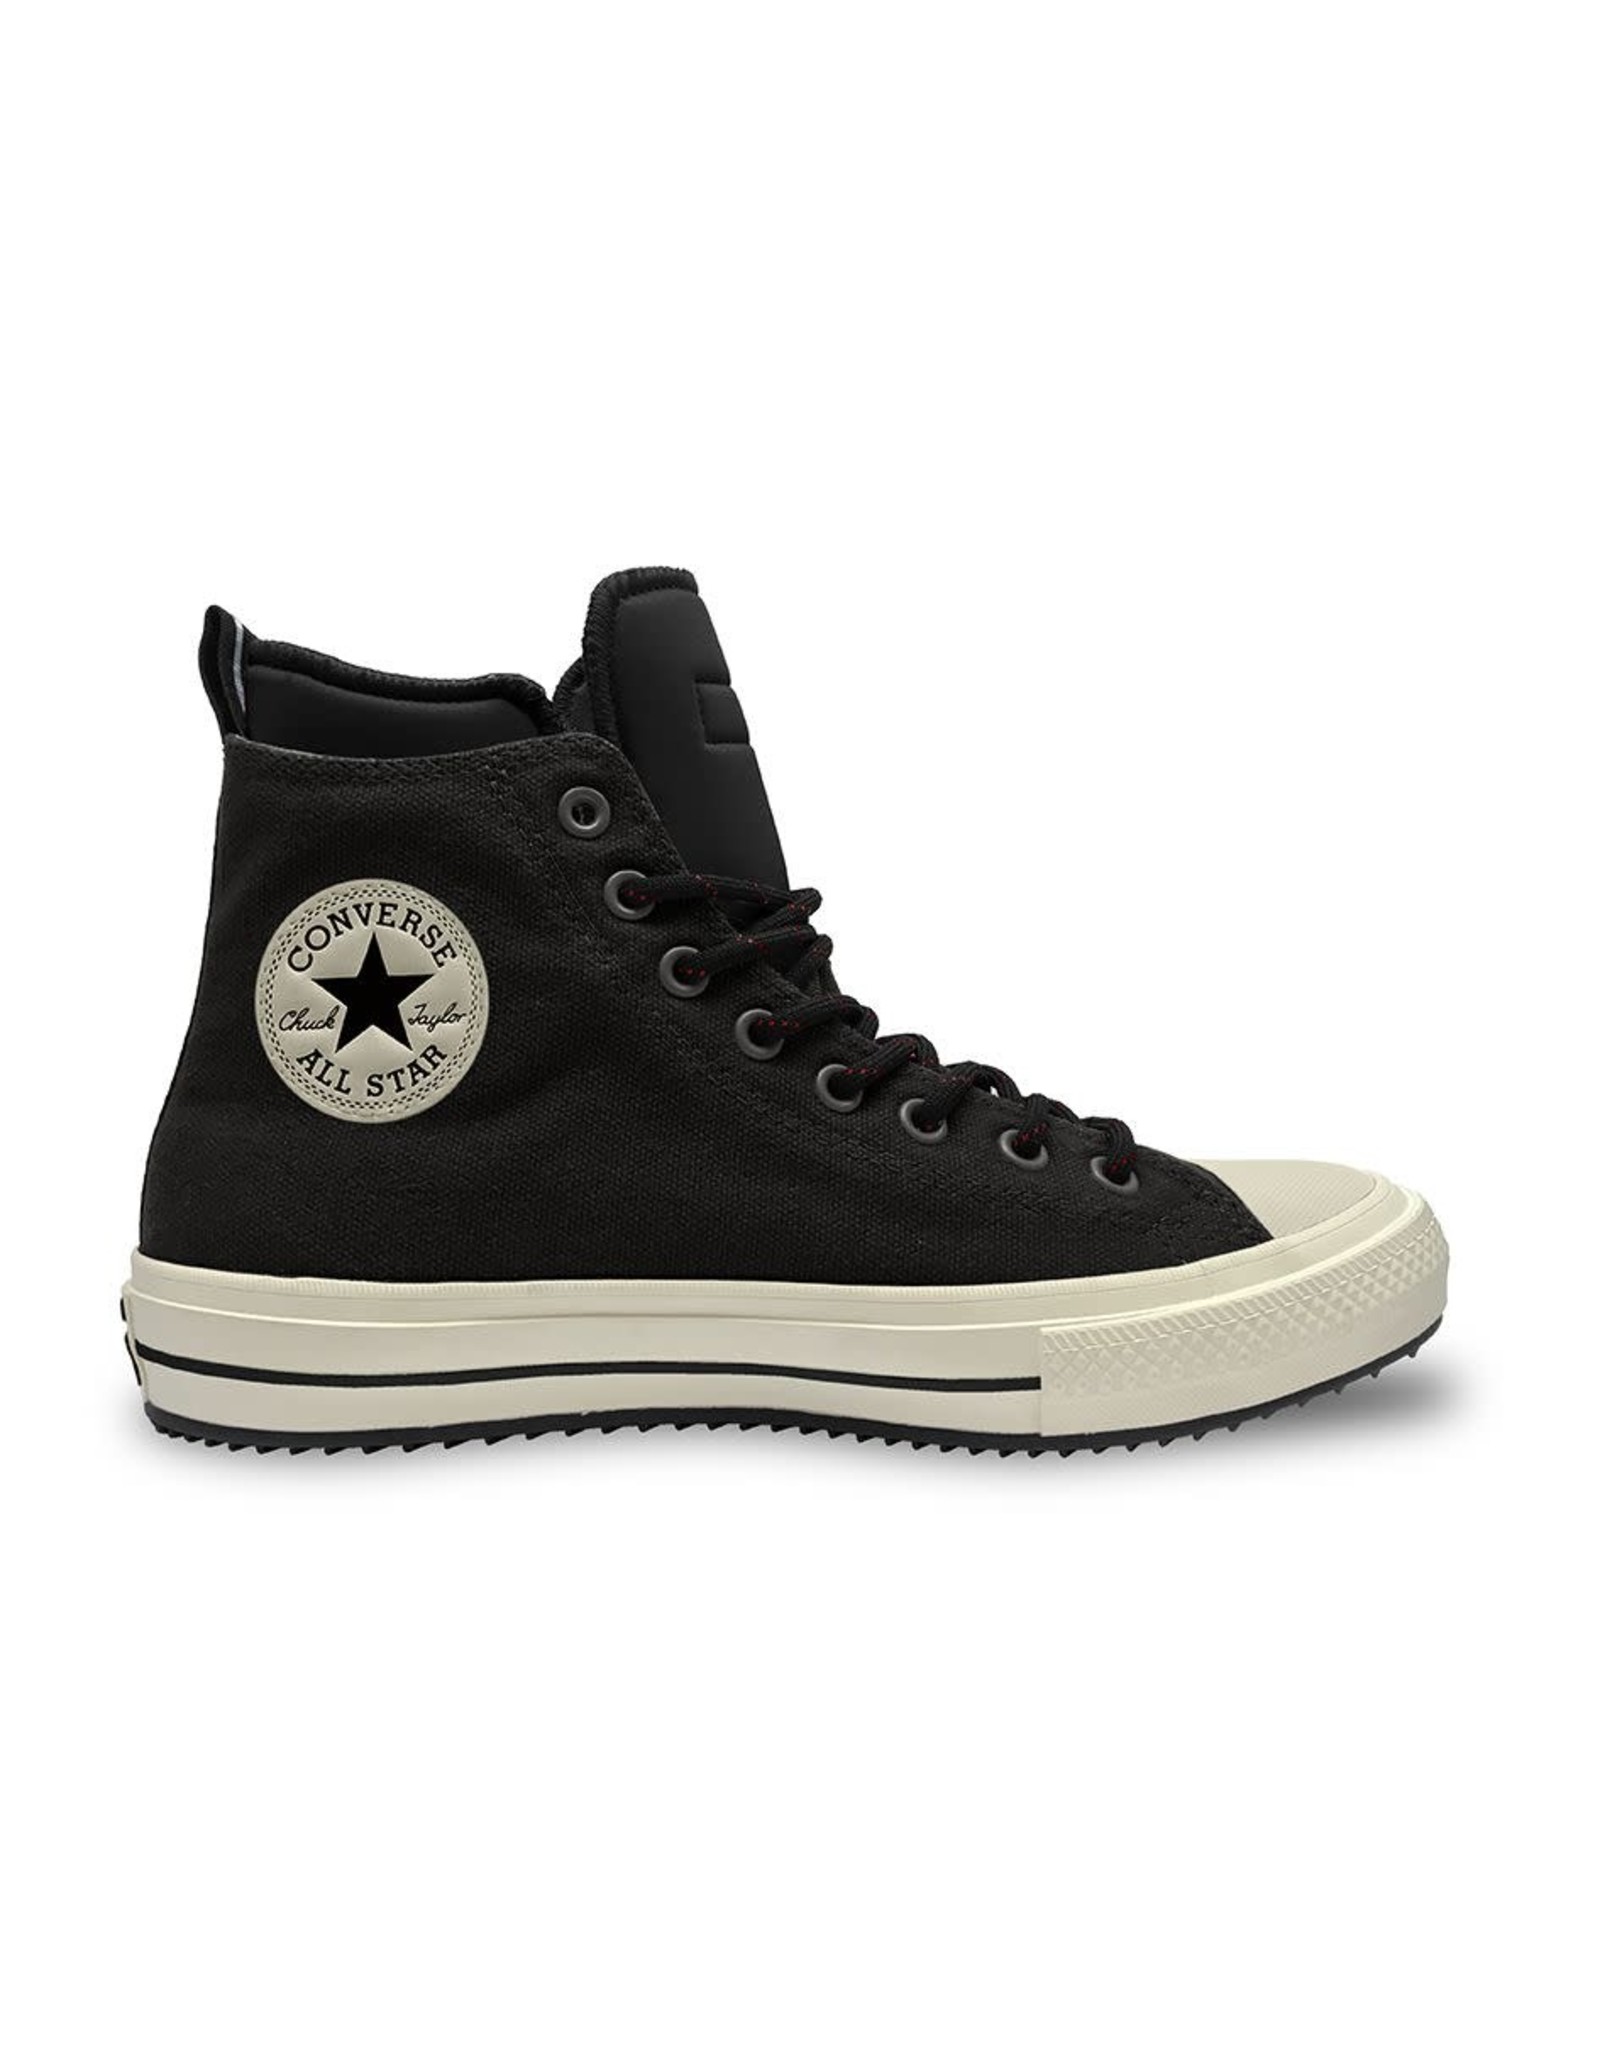 converse all stars boots